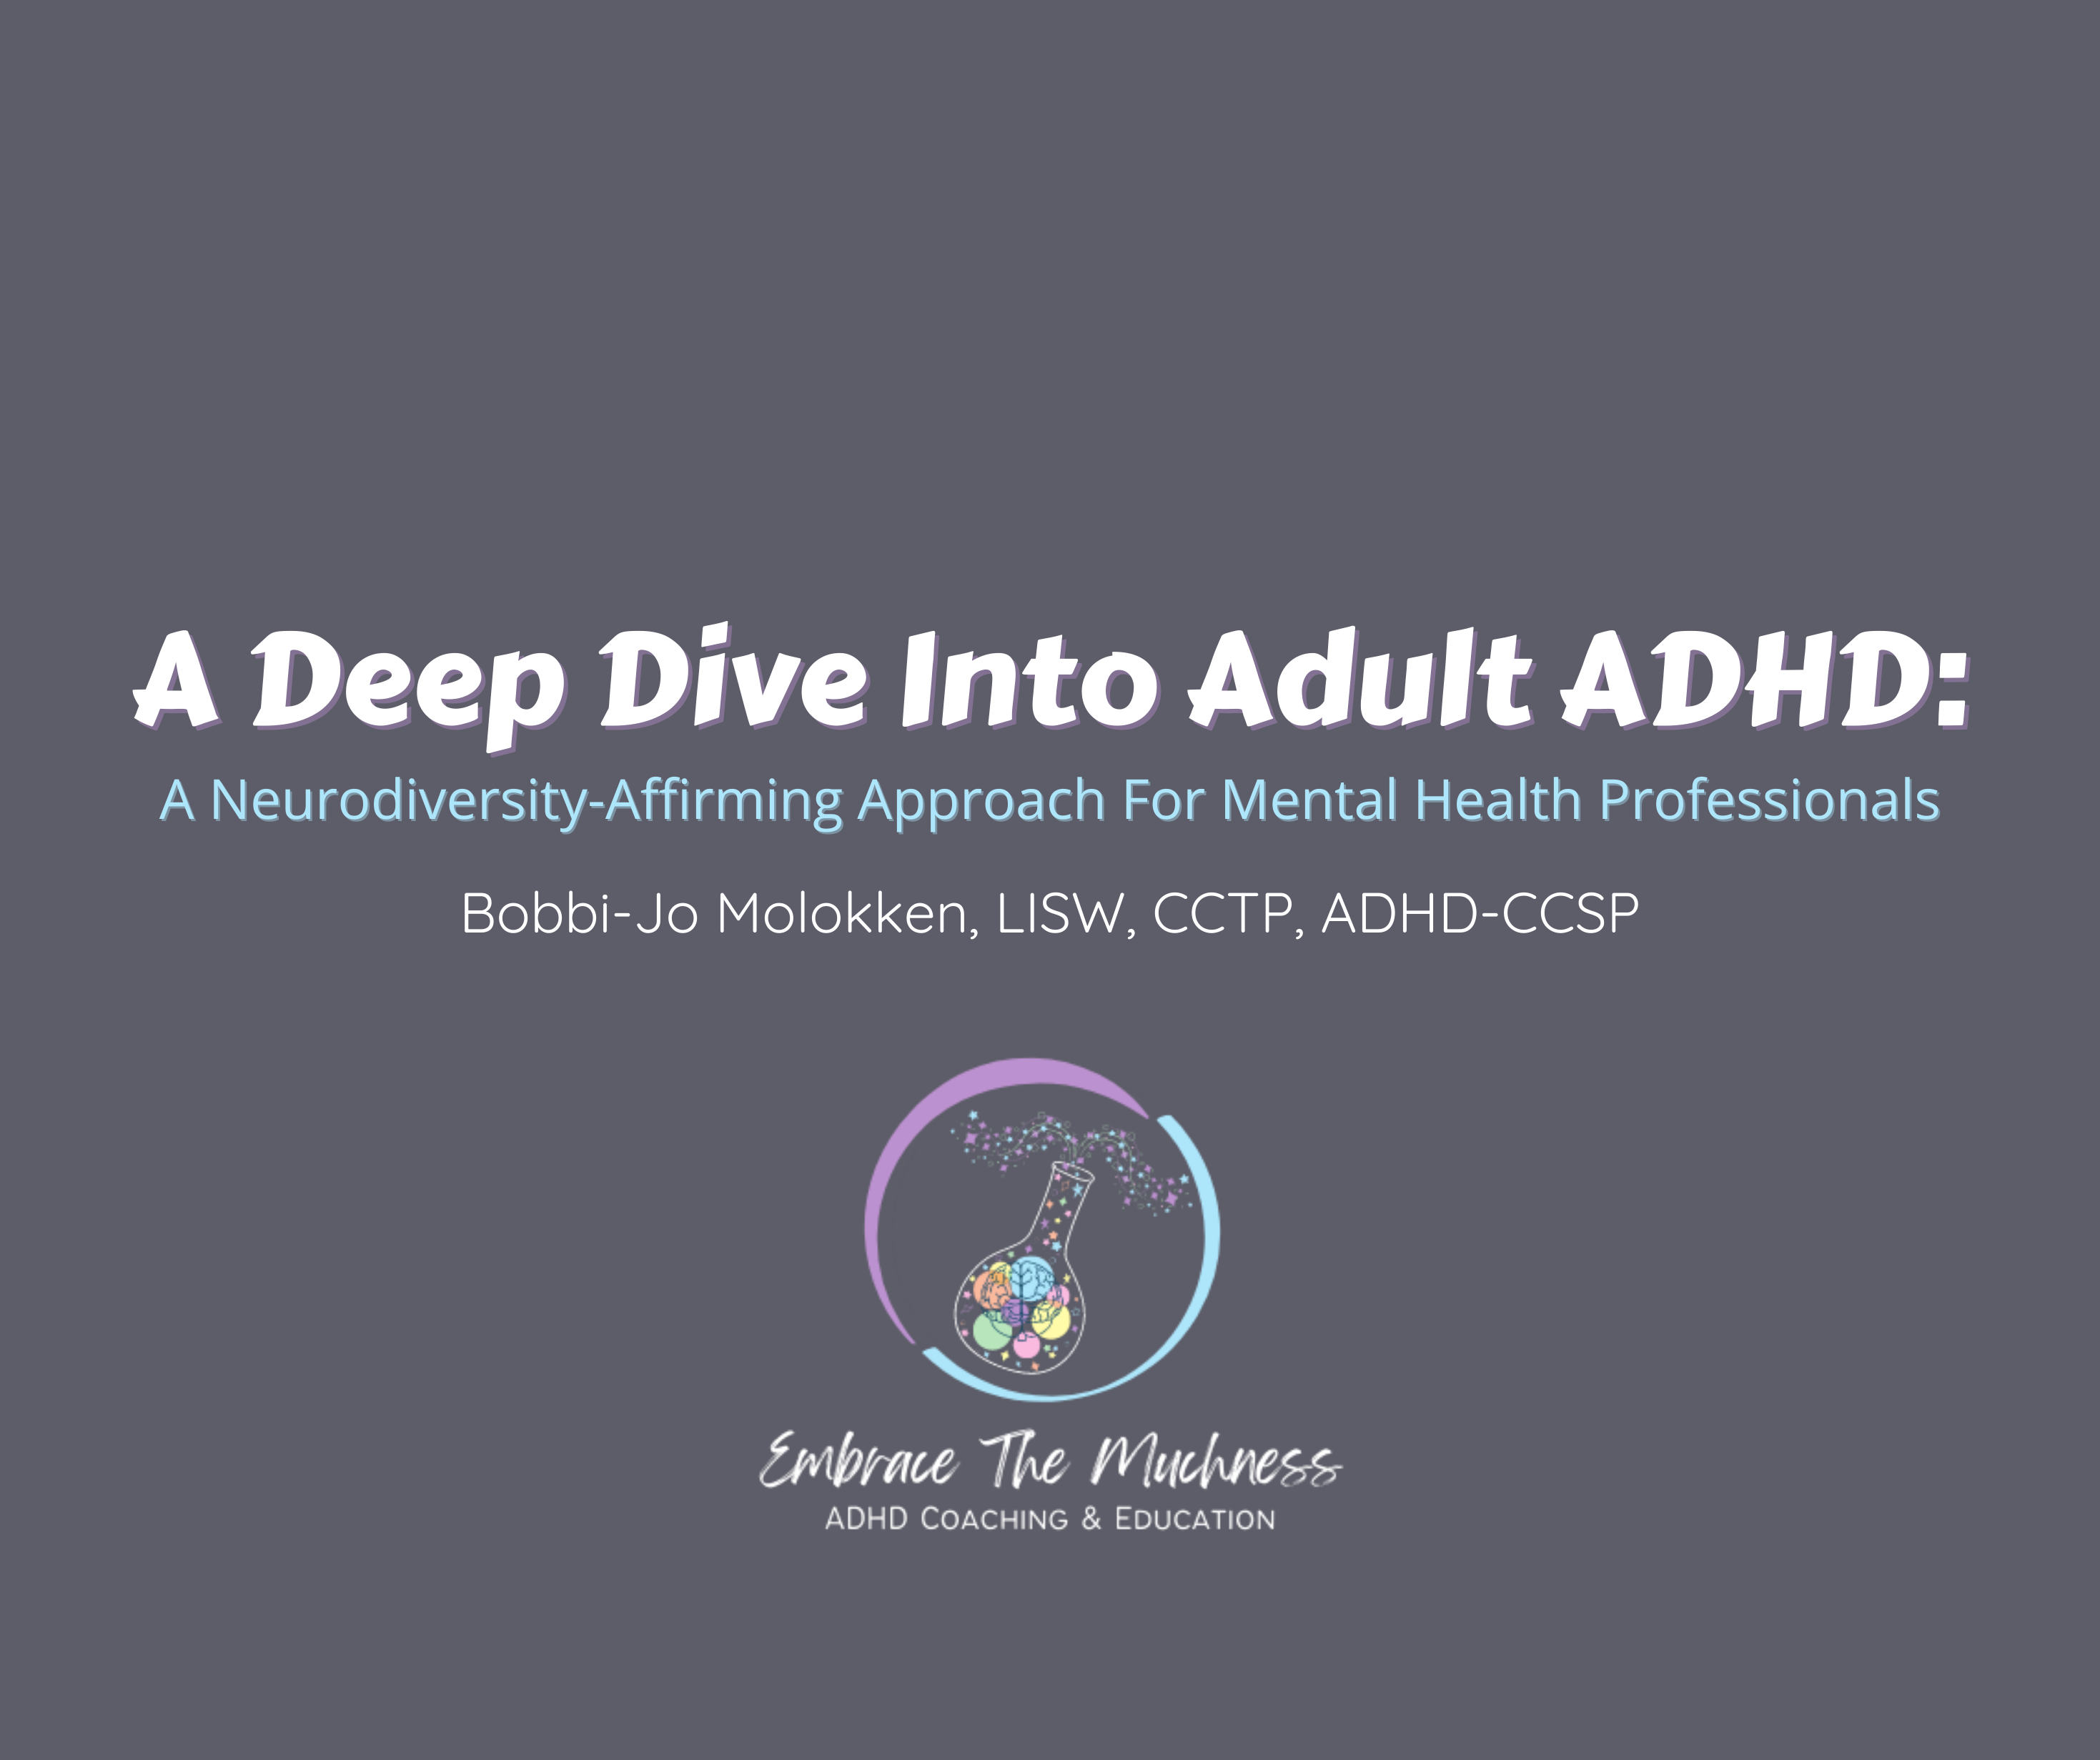 A Deep Dive into Adult ADHD: A Neurodiversity Affirming Approach for Mental Health Professionals